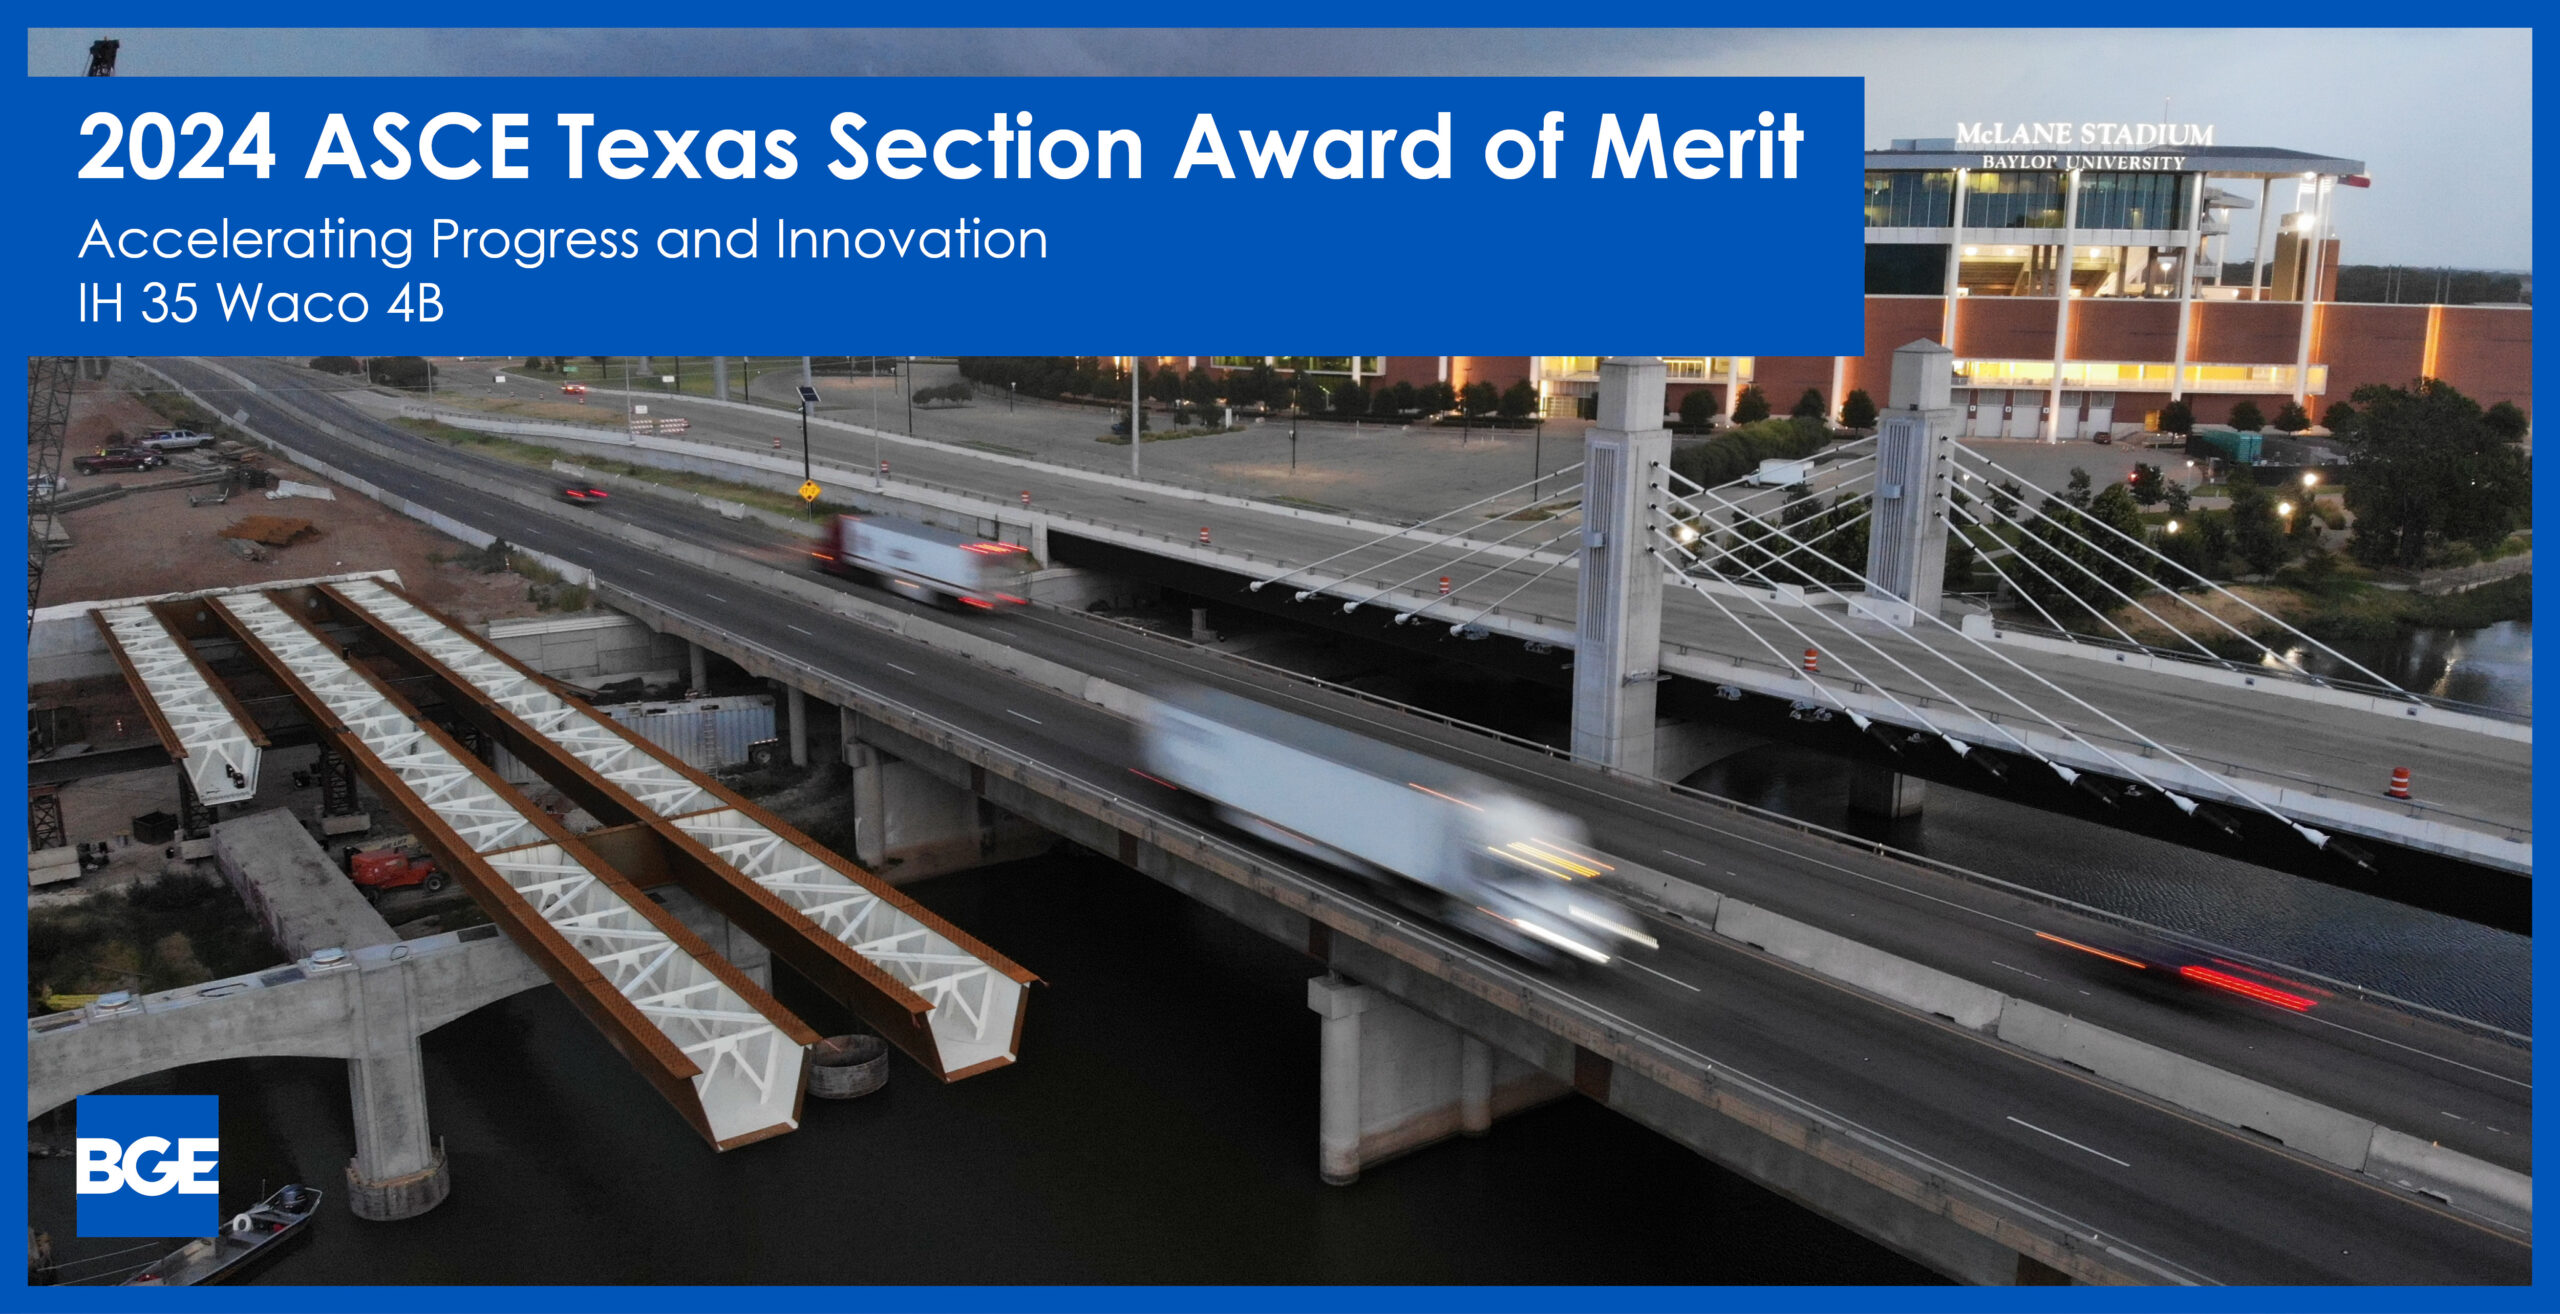 BGE Honored With 2024 ASCE Award of Merit for IH 35 4B Waco Project